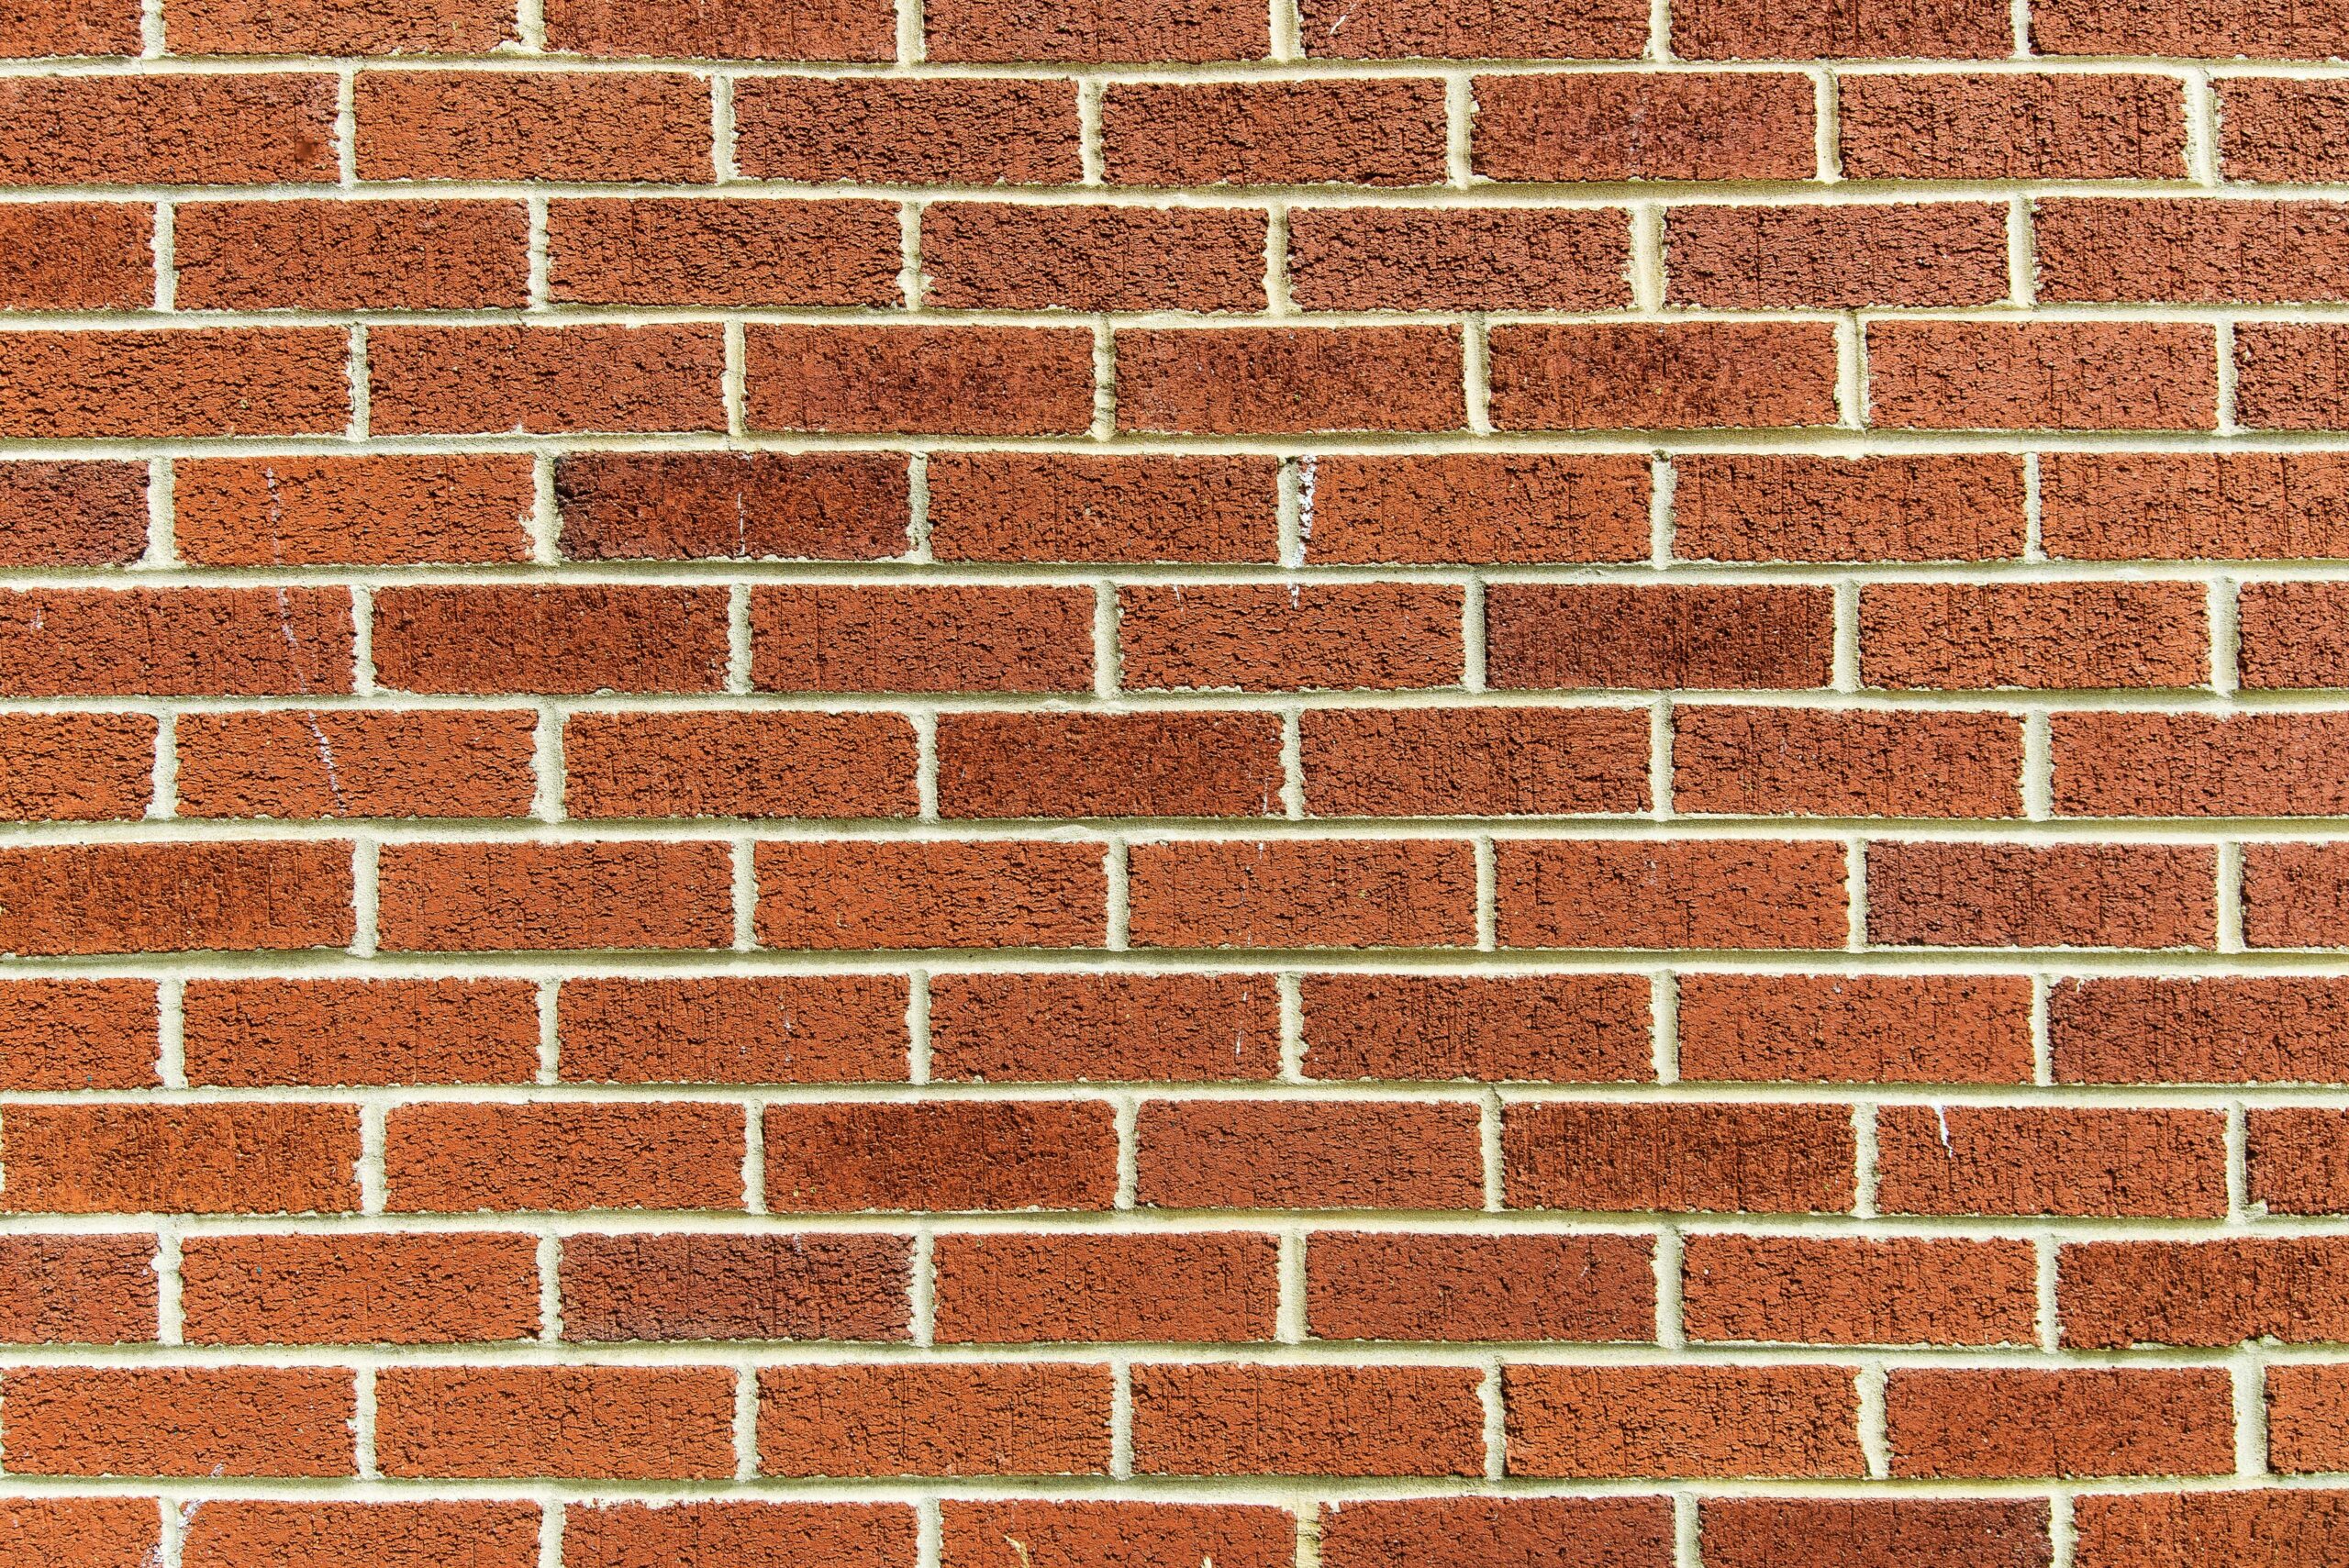 How To Take Care For Your Home's Masonry